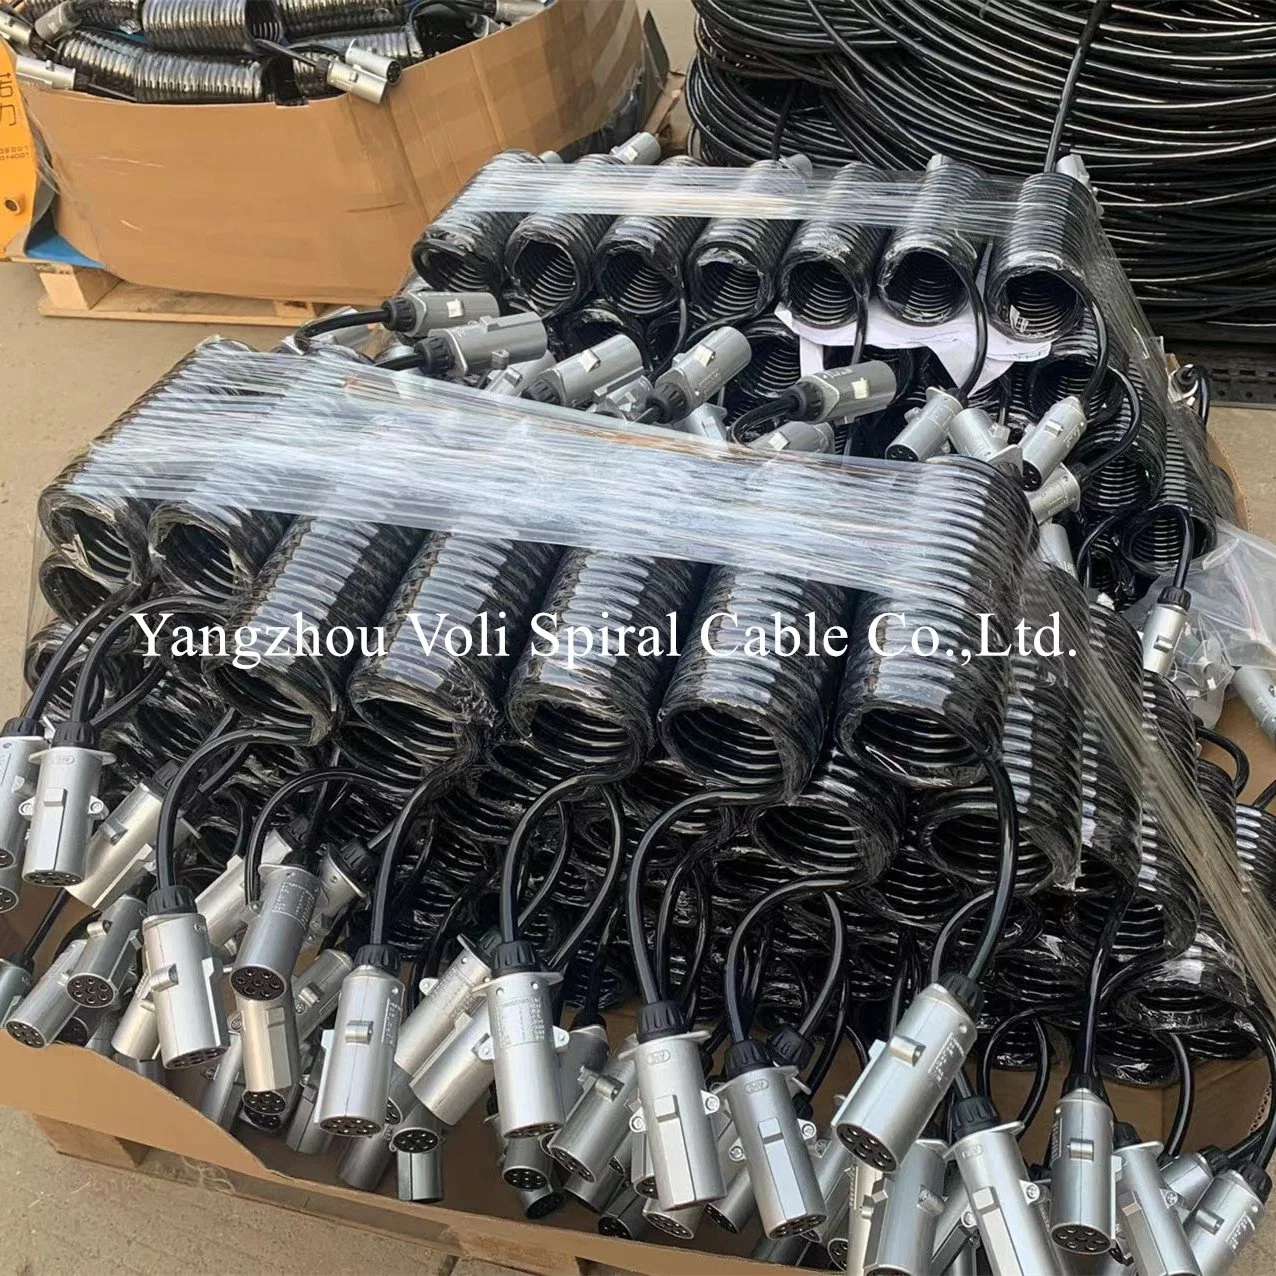 Brake System 7core Electrical Cable Wire Seven Core Electrical Trailer Cable